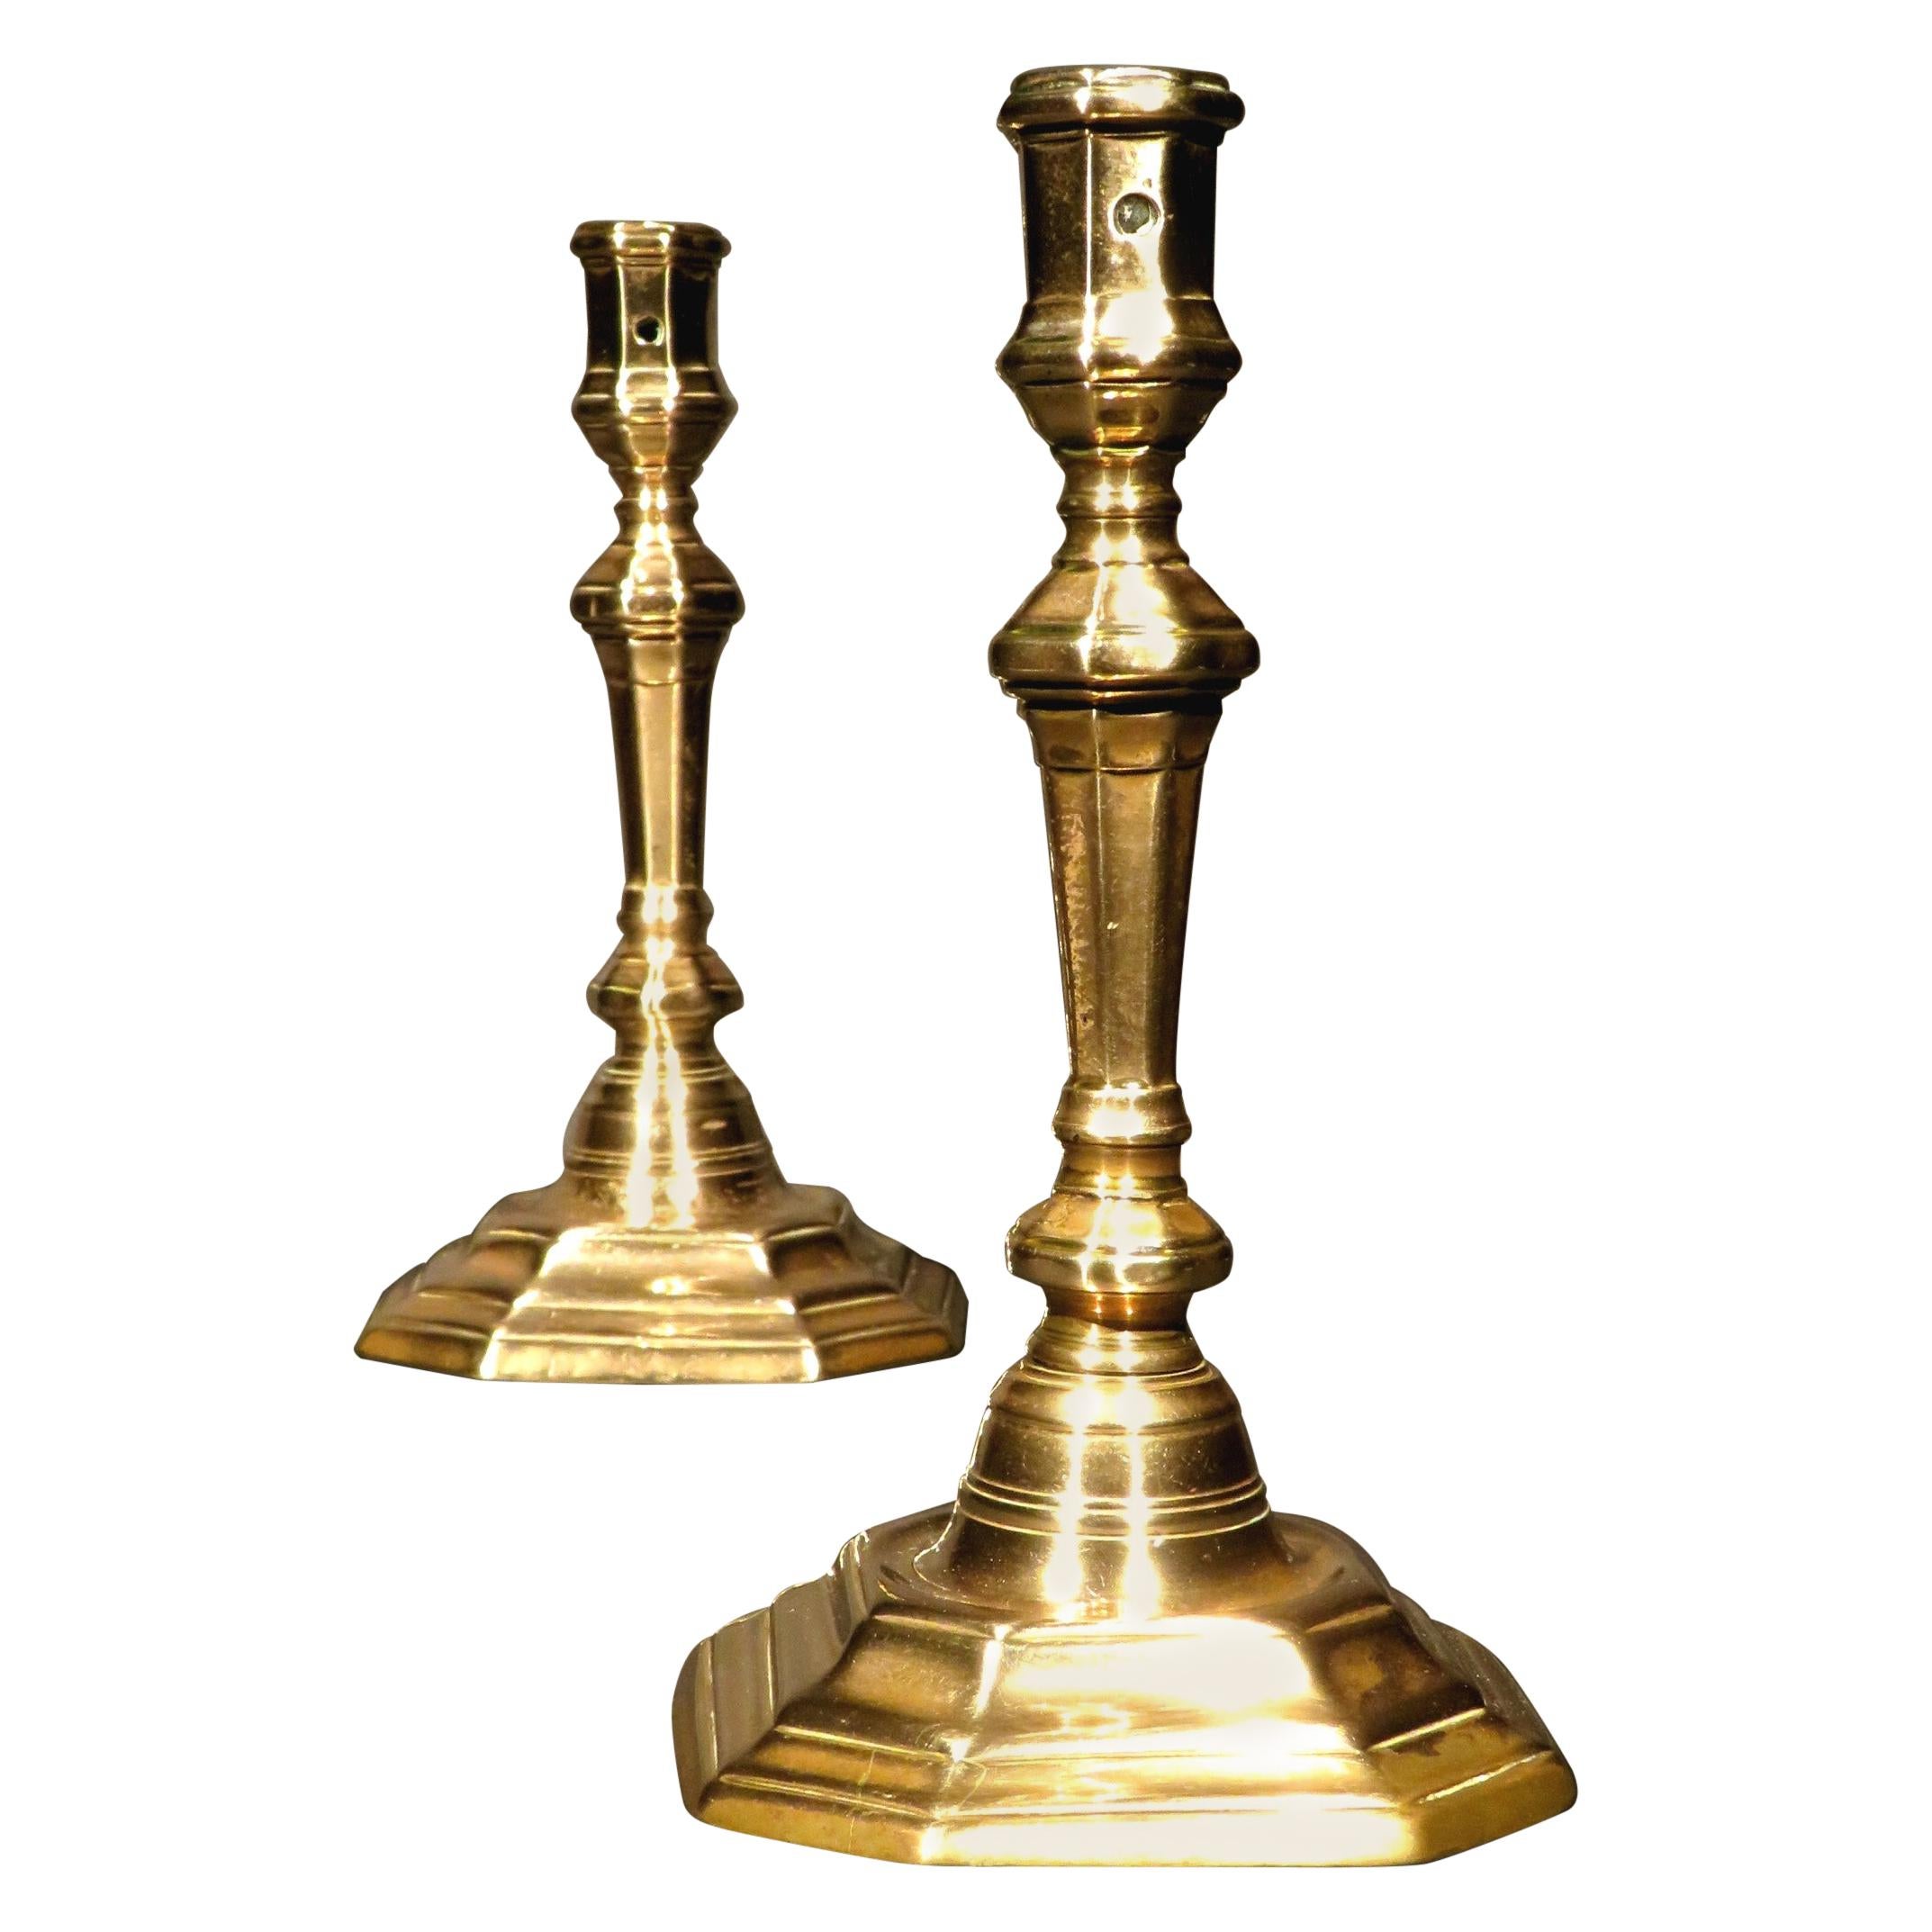 Rare Pair of Early 18th Century Bell Metal Candlesticks, France Circa 1710